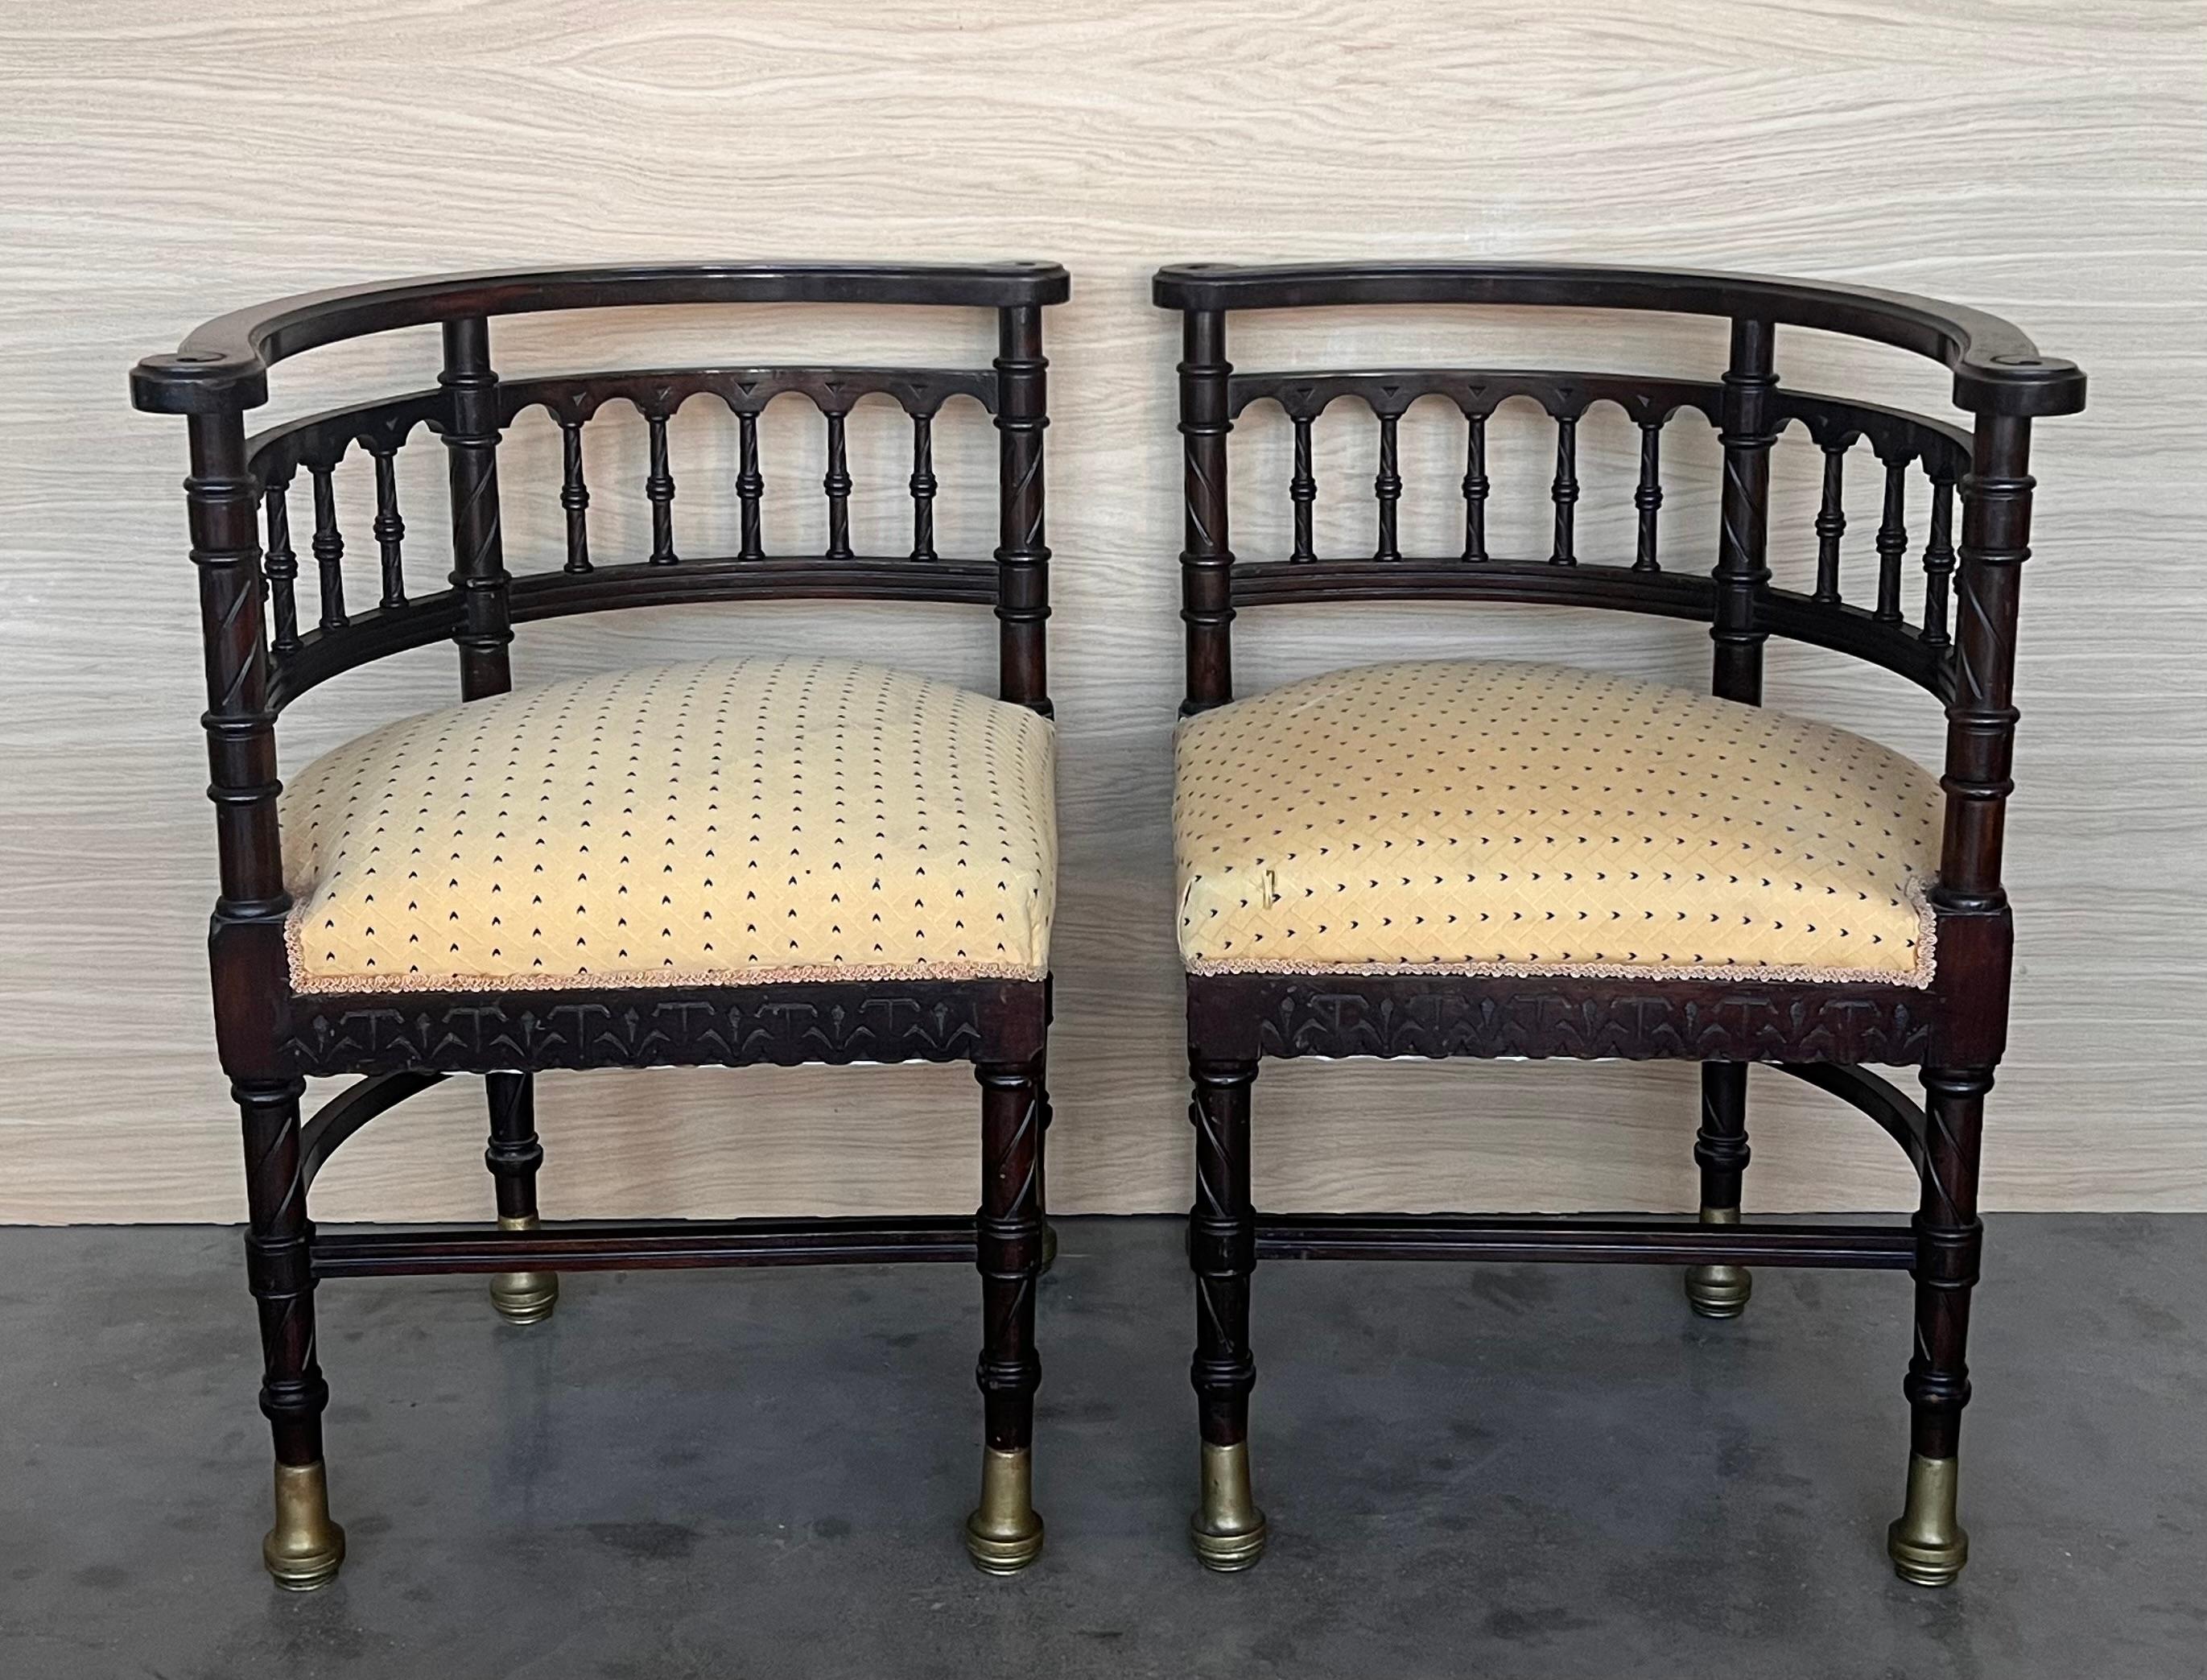 Pair of Spanish horseshoe walnut carved armchairs with corner form. Completely restored.